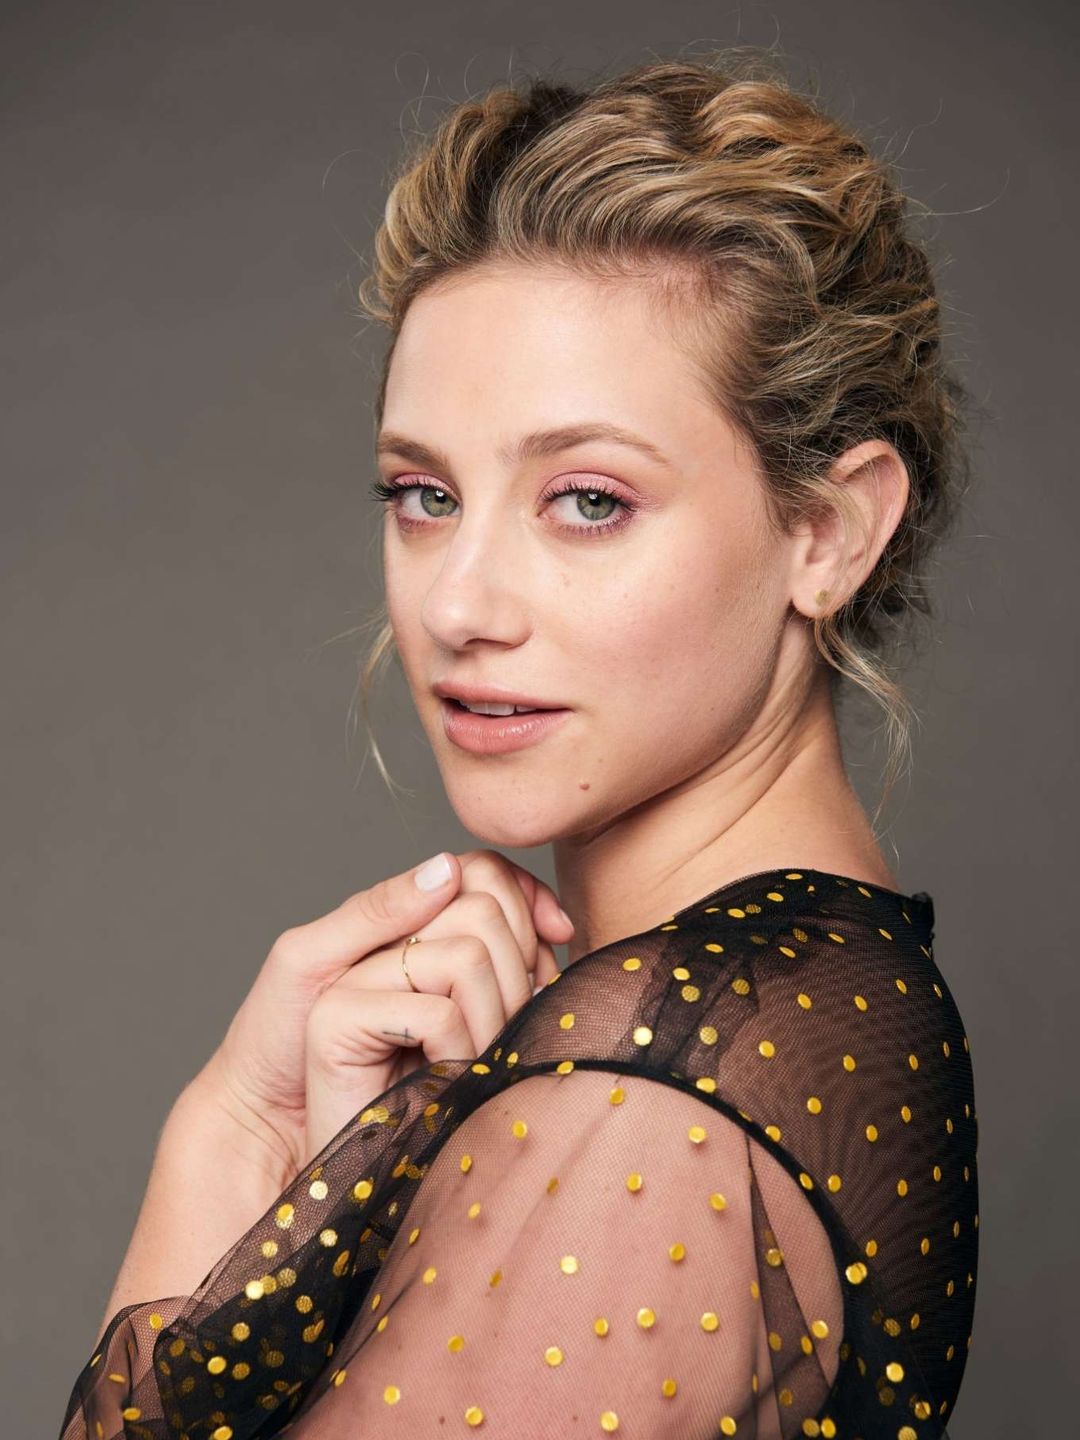 Lili Reinhart who is her mother